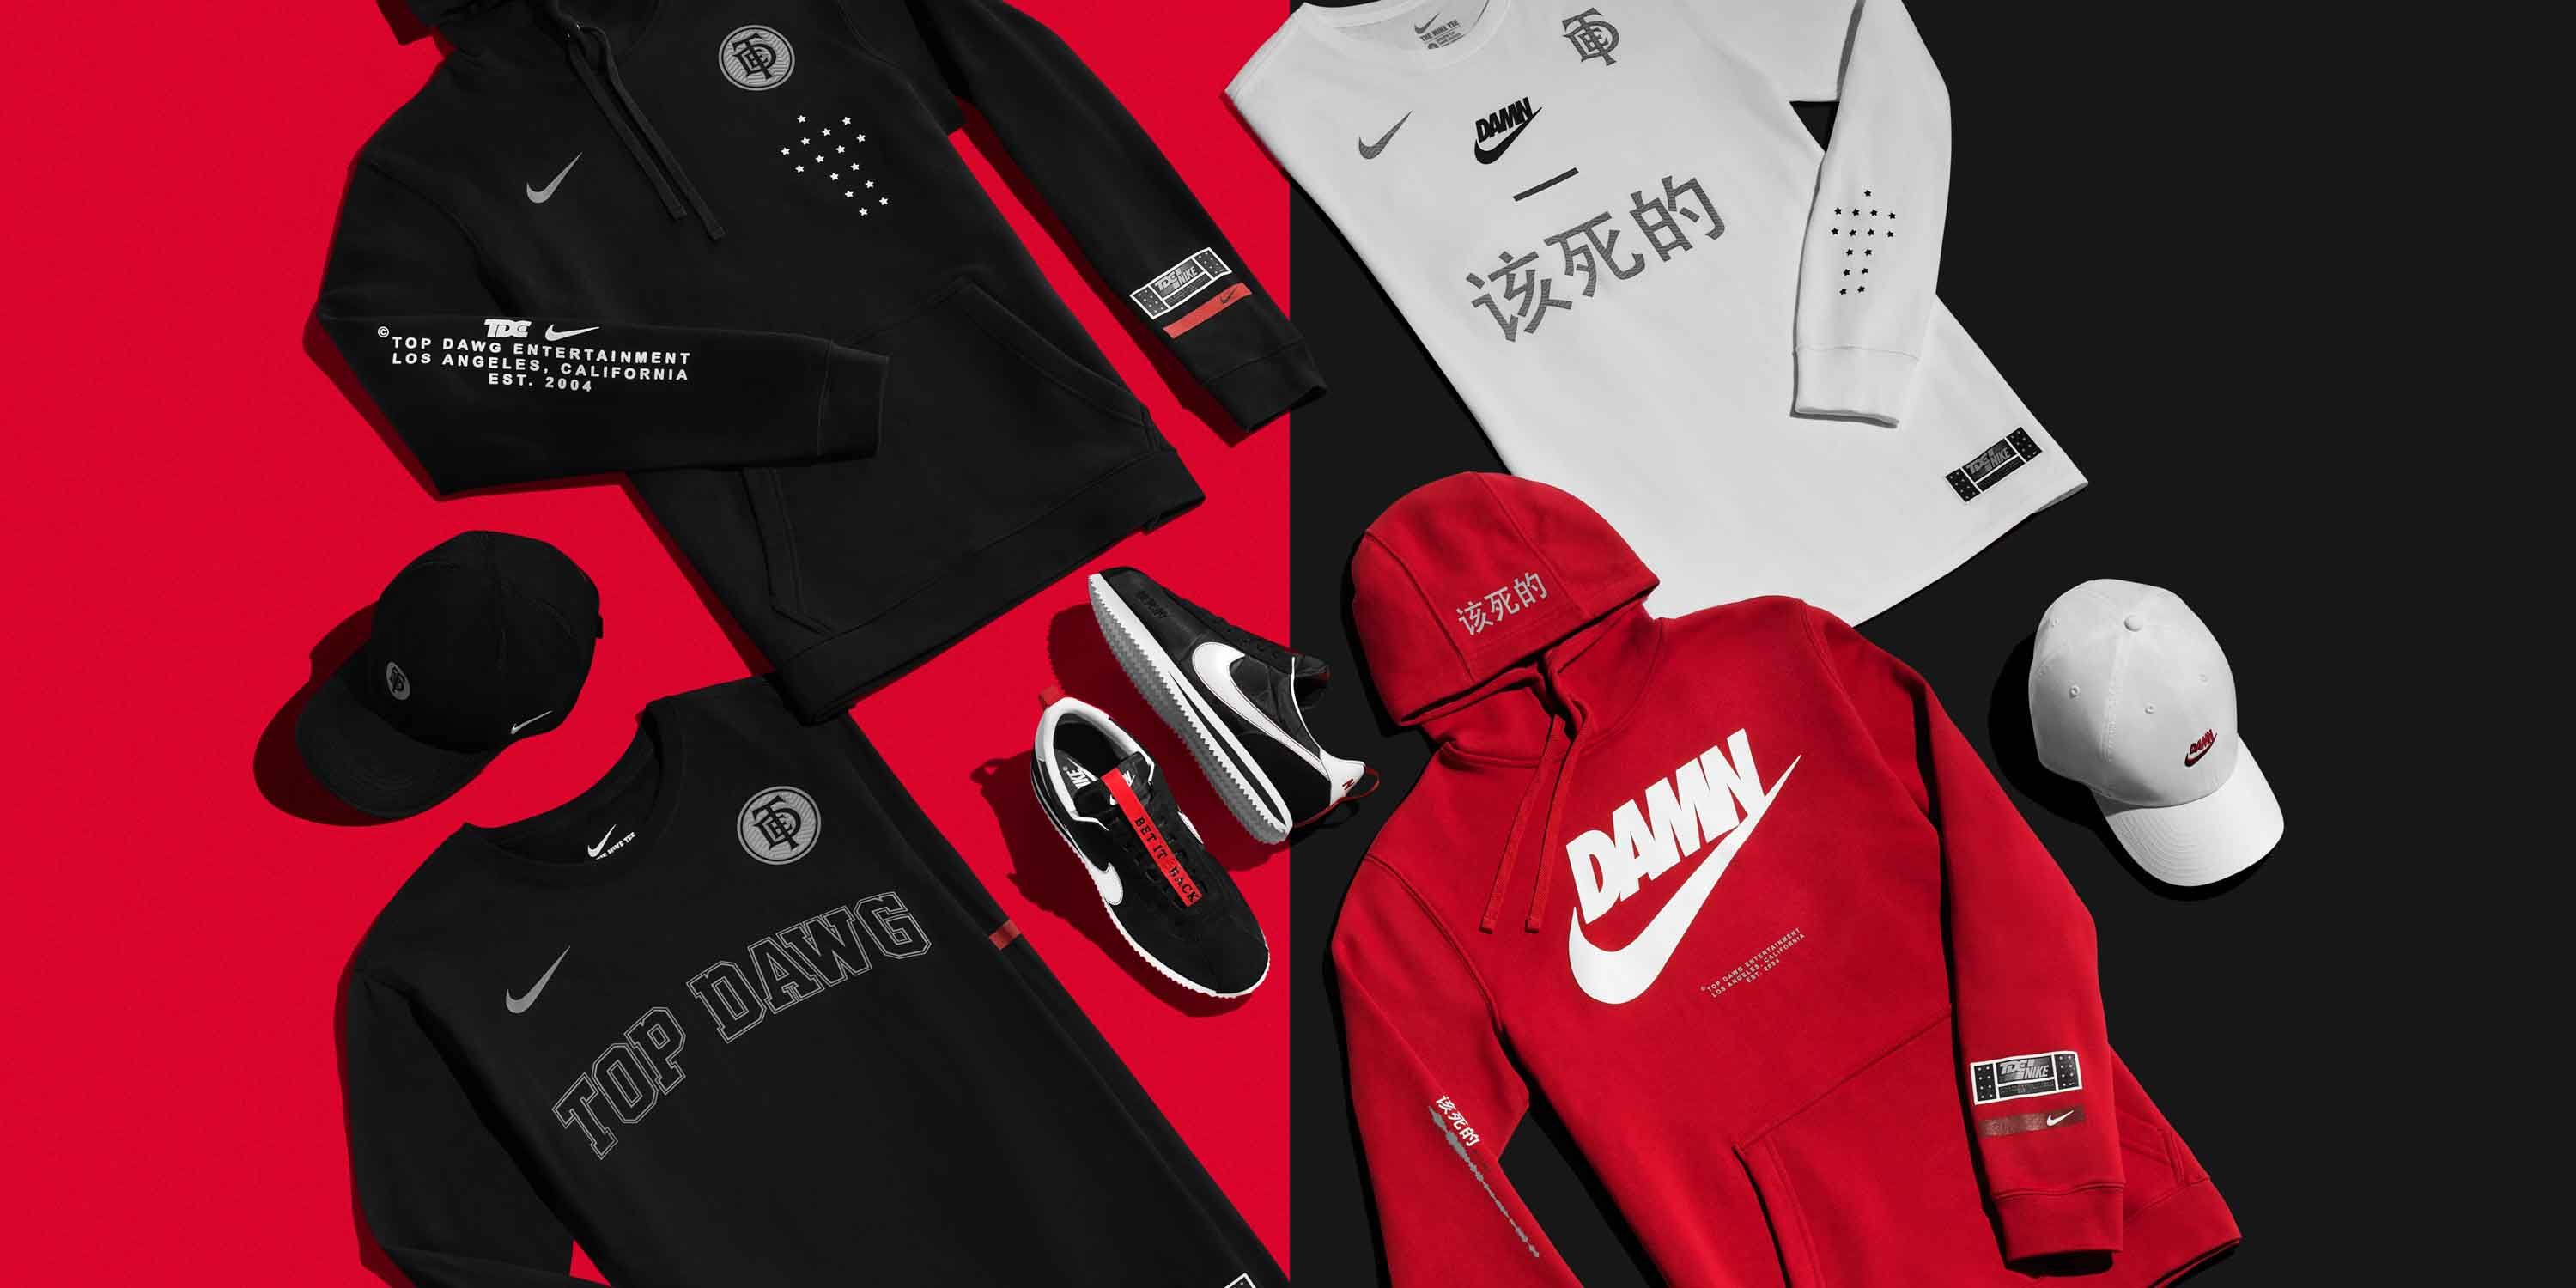 Incorrecto cerrar Morbosidad Nike Cortez Kenny and Top Dawg Entertainment Capsules - Nike x Kendrick and  TDE Will Get You Excited About Concert Merch Again